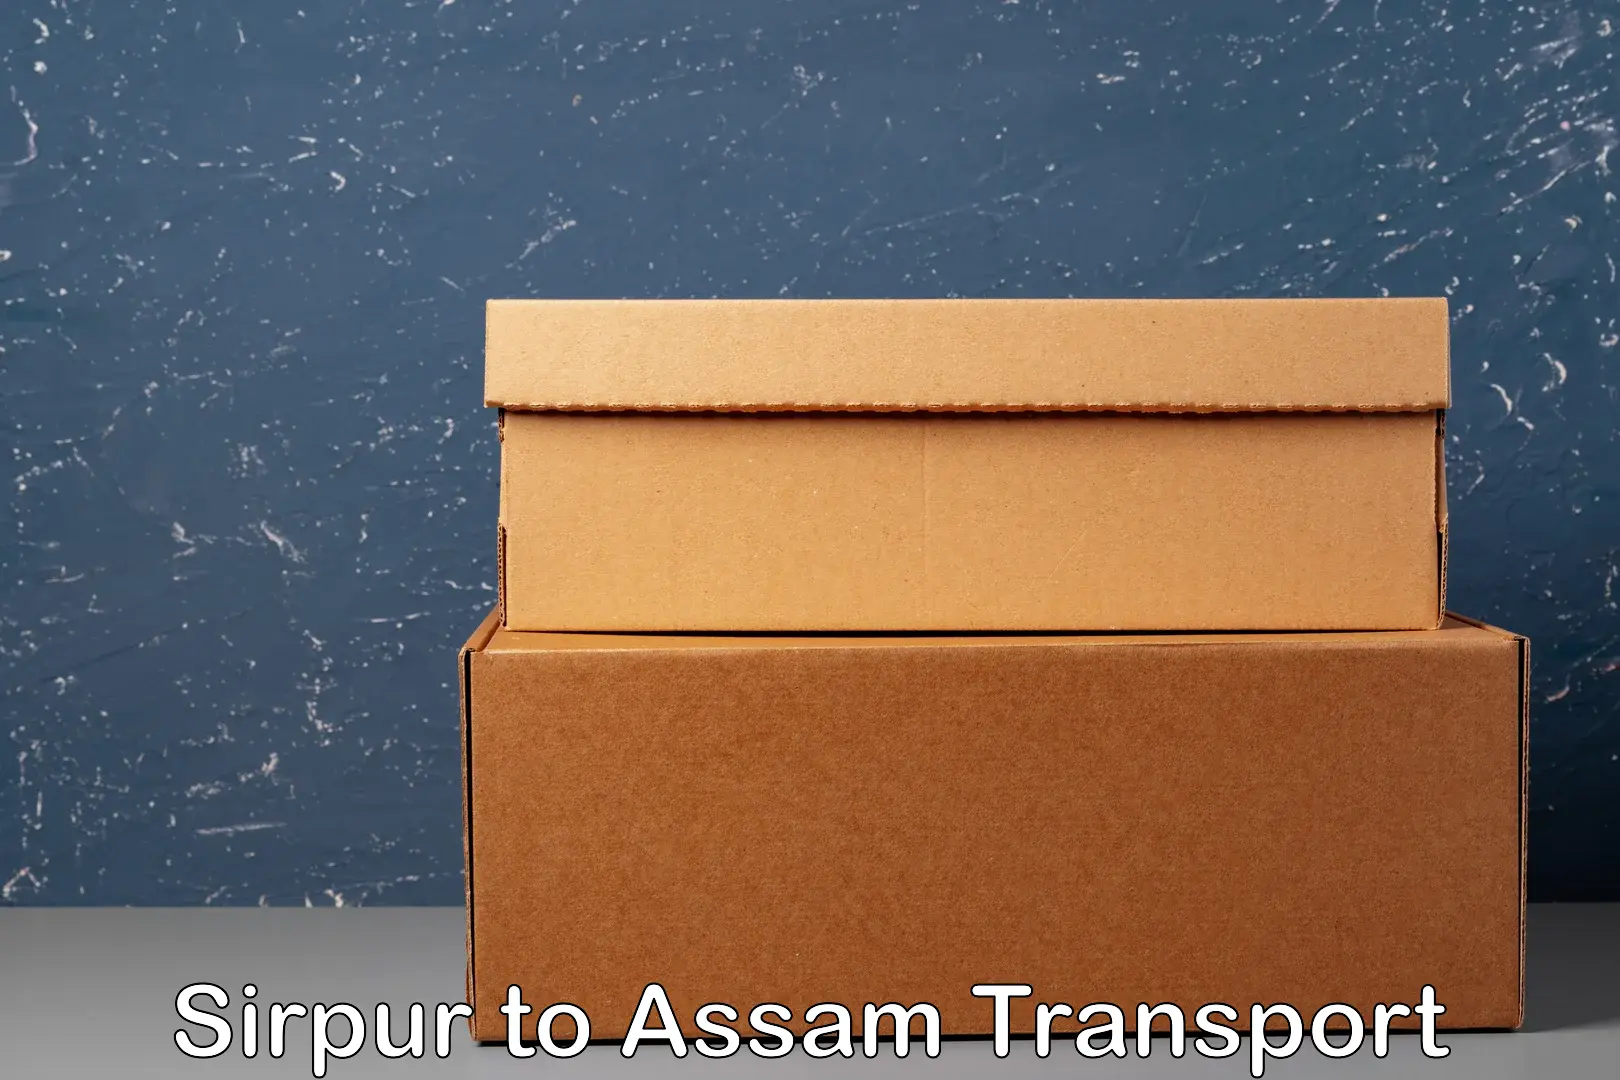 Daily parcel service transport Sirpur to Assam